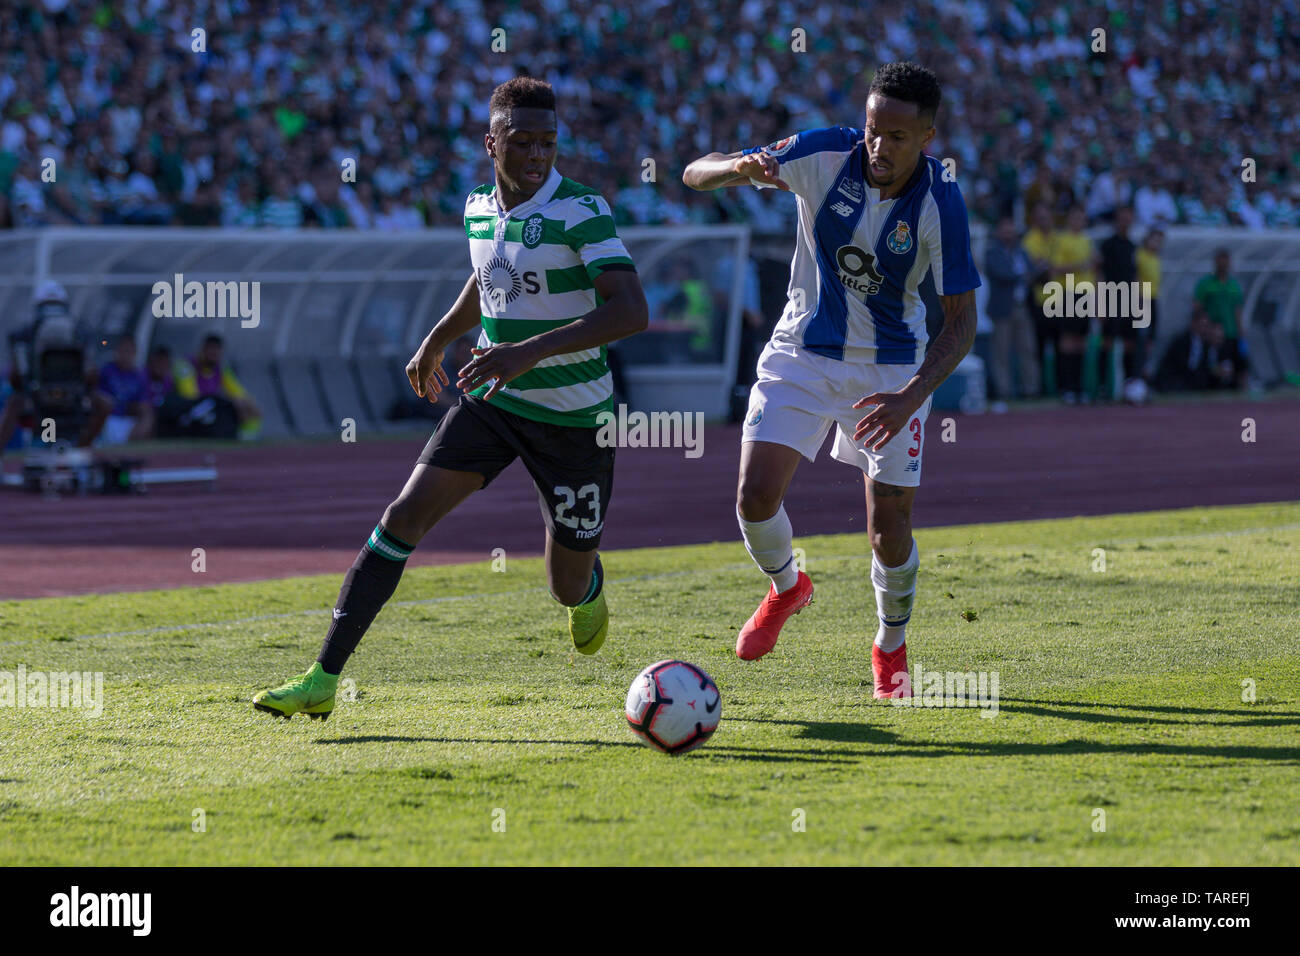 May 25, 2019. Oeiras, Portugal. Sporting's forward from Mali Abdoulay Diaby (23) and Porto's defender from Brazil Eder Militao (3) in action during the game Sporting CP vs FC Porto © Alexandre de Sousa/Alamy Live News Stock Photo